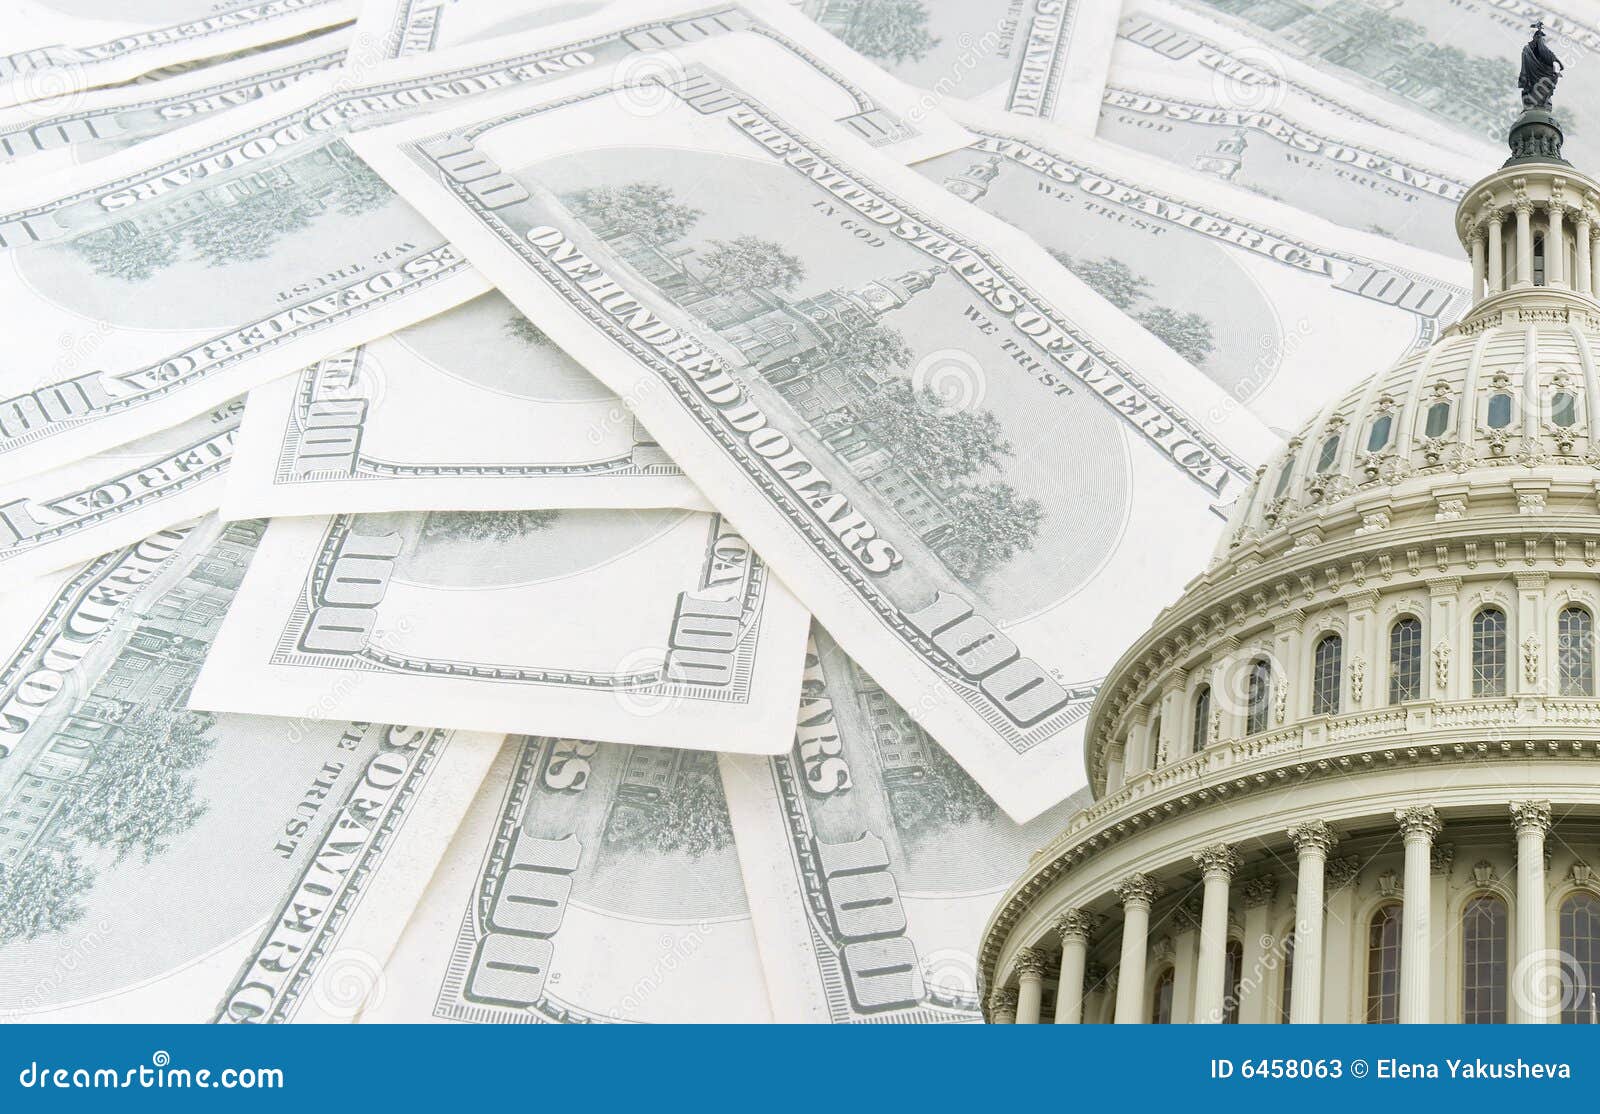 us capitol on 100 dollars banknotes background